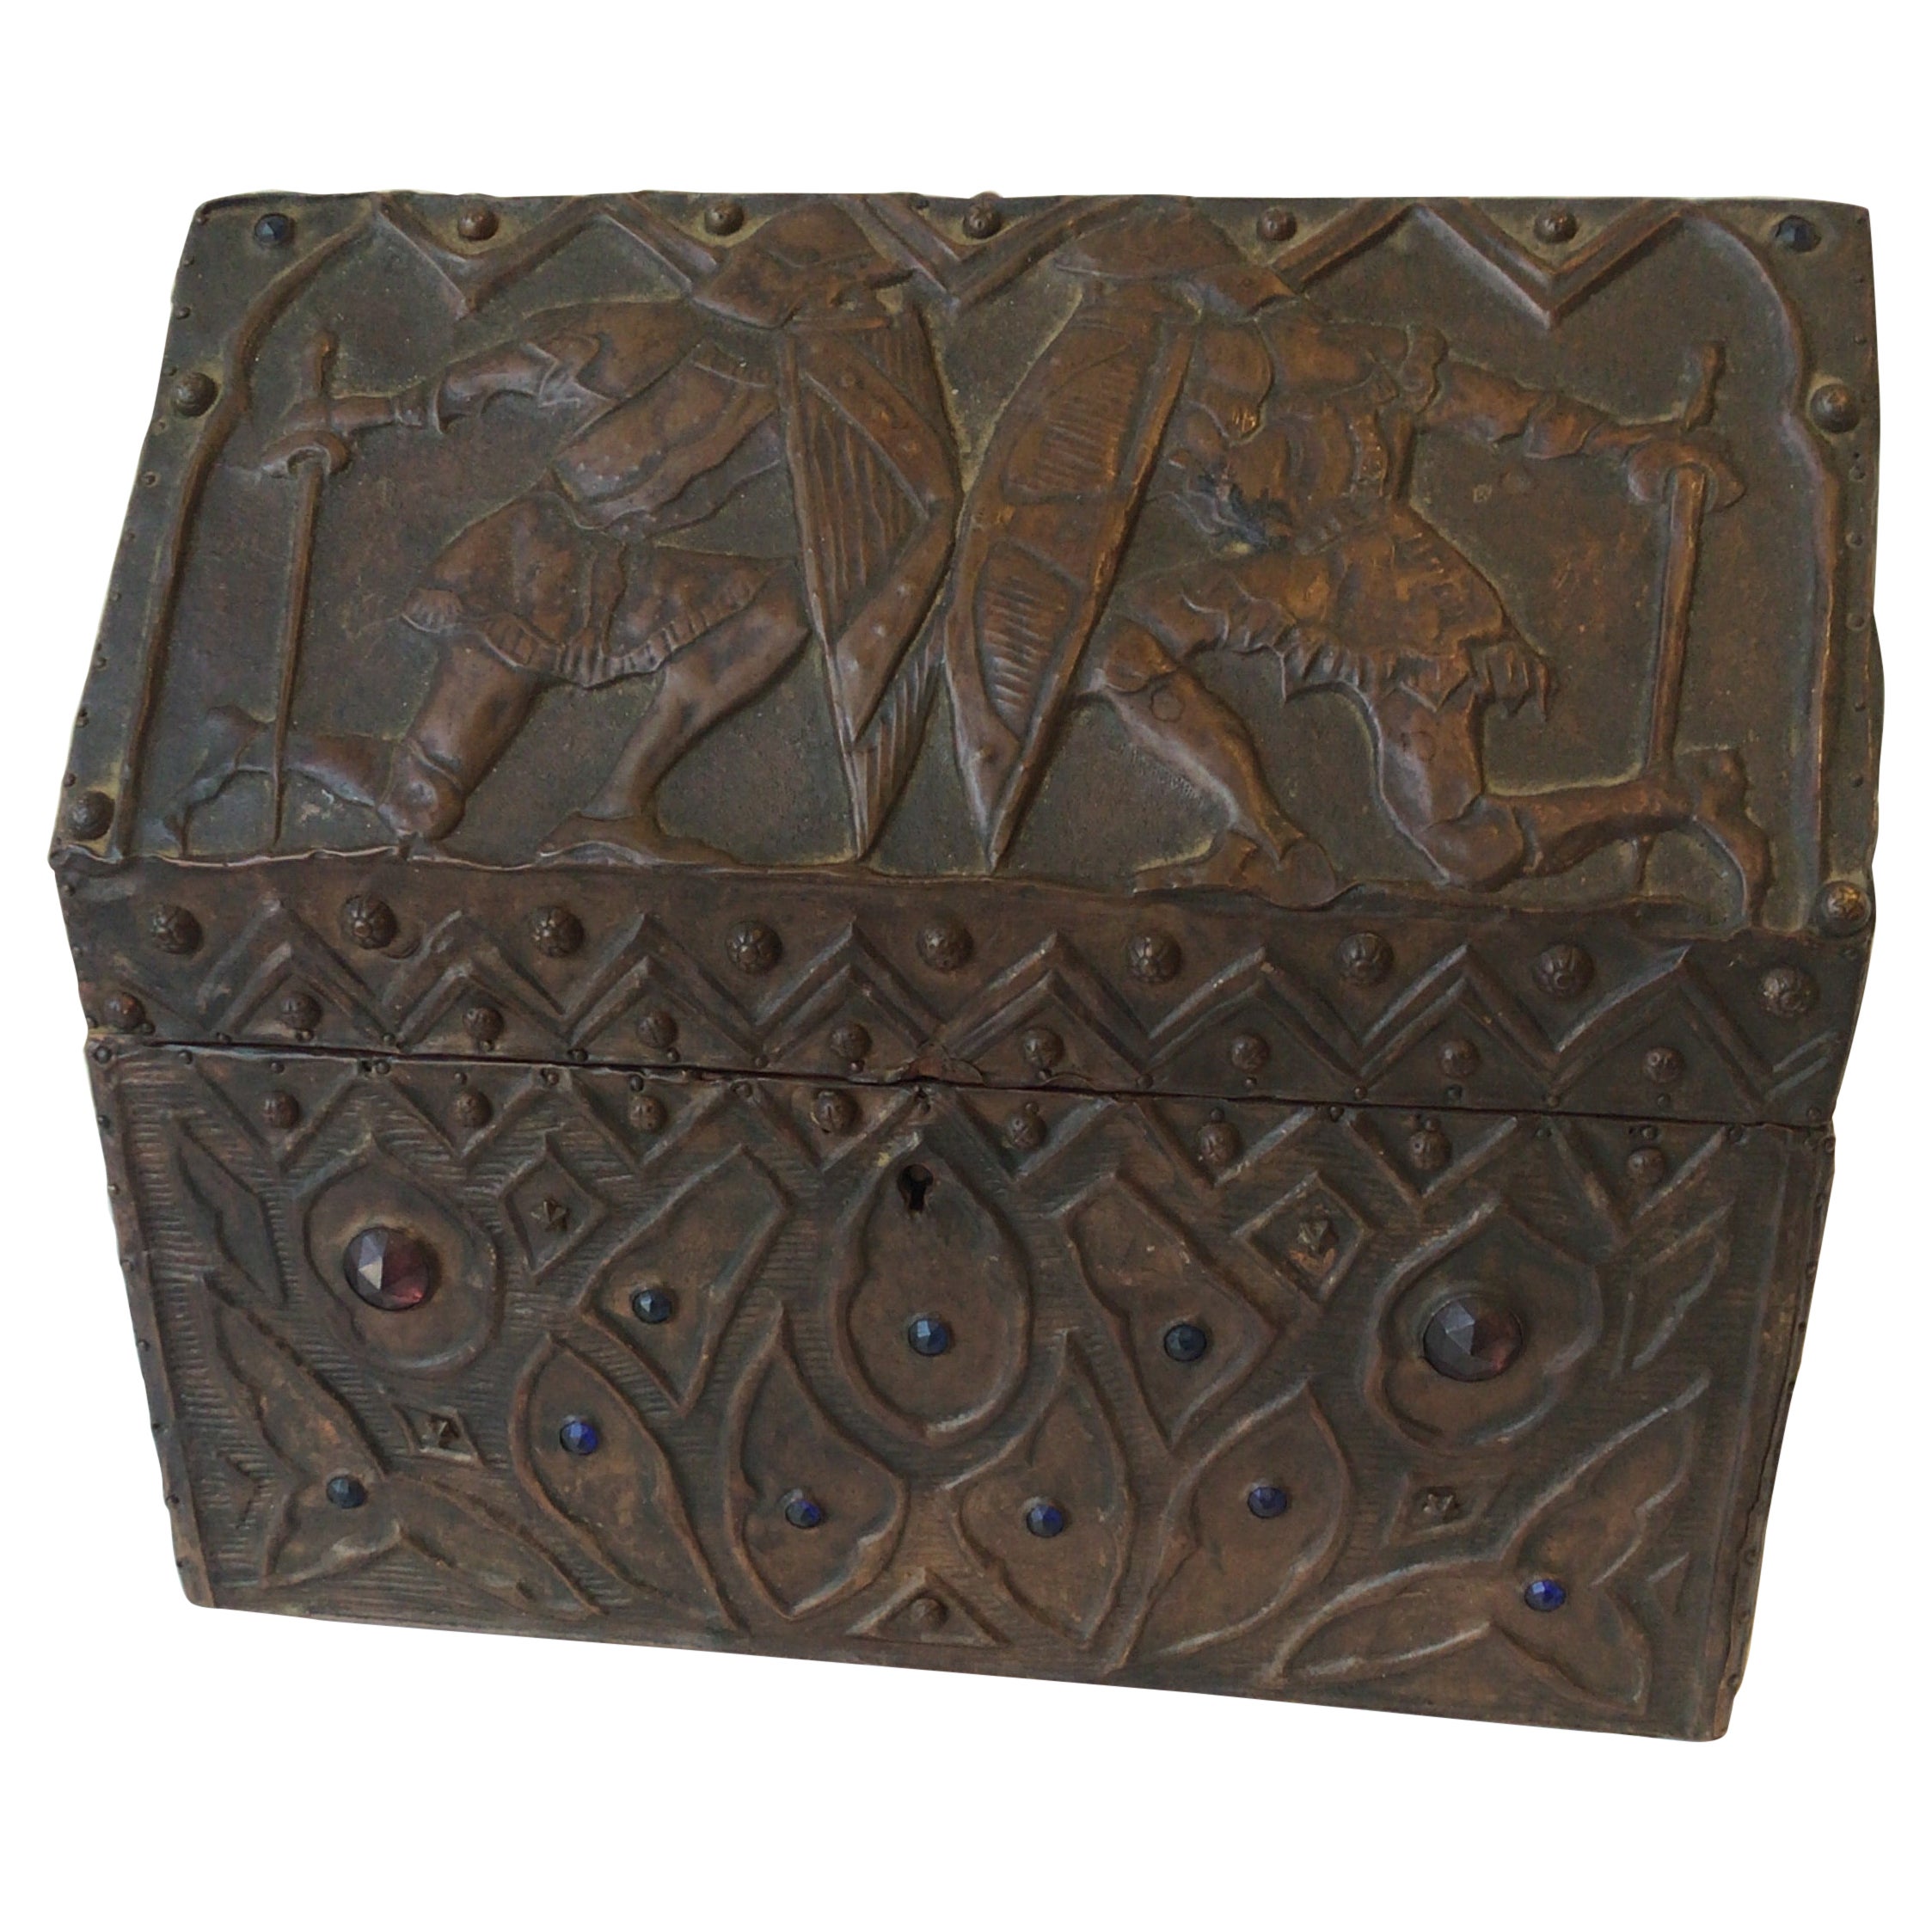 1920s Copper Warriors Box with Jewels